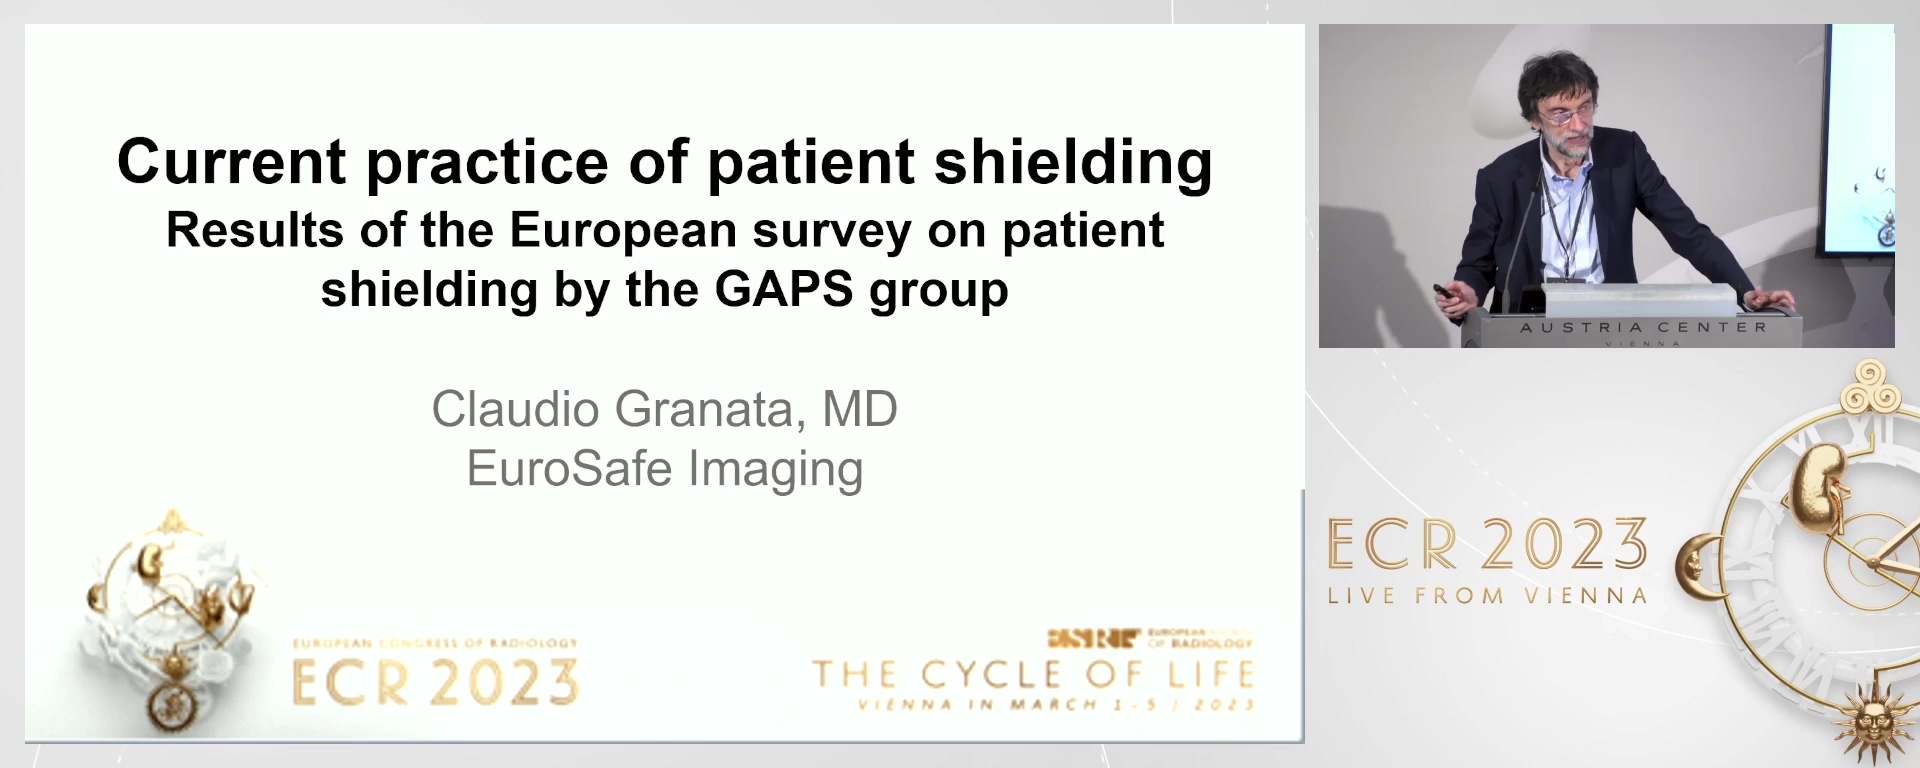 Current practice of patient shielding: results of the European survey on patient shielding by the GAPS group